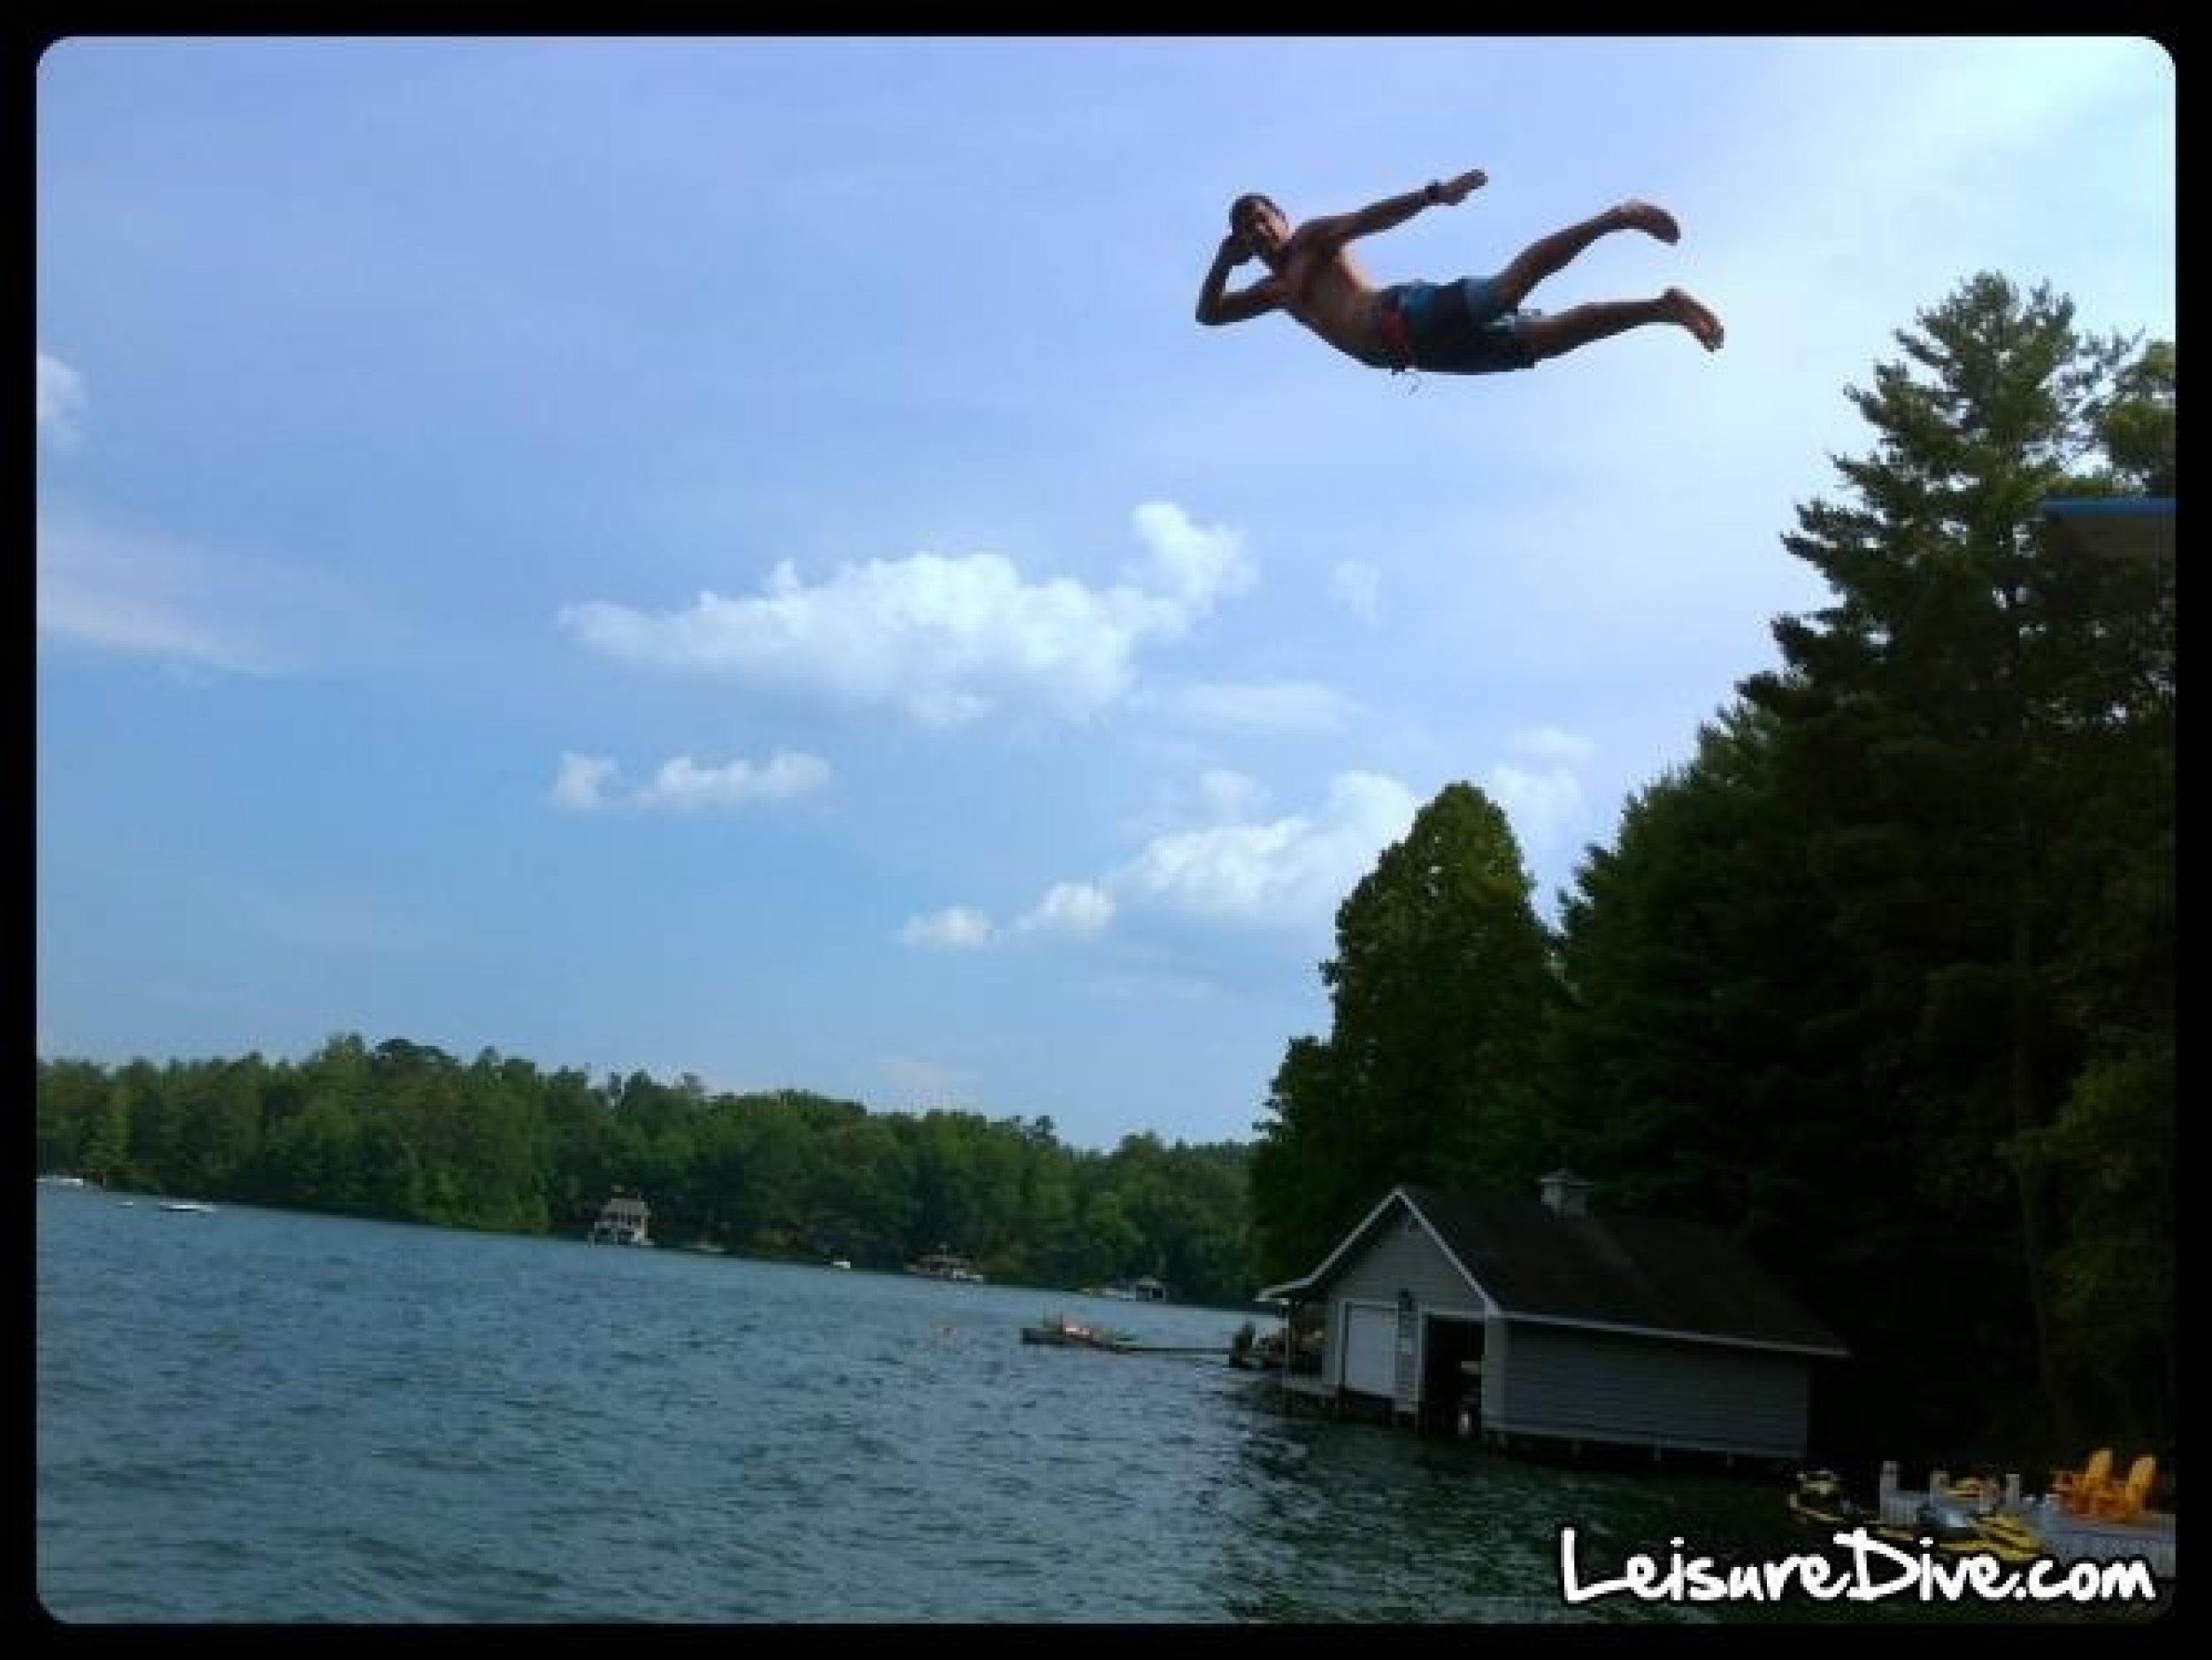 Leisure Diving Pictures Follow the Levitating Girl, Planking and Owling Craze